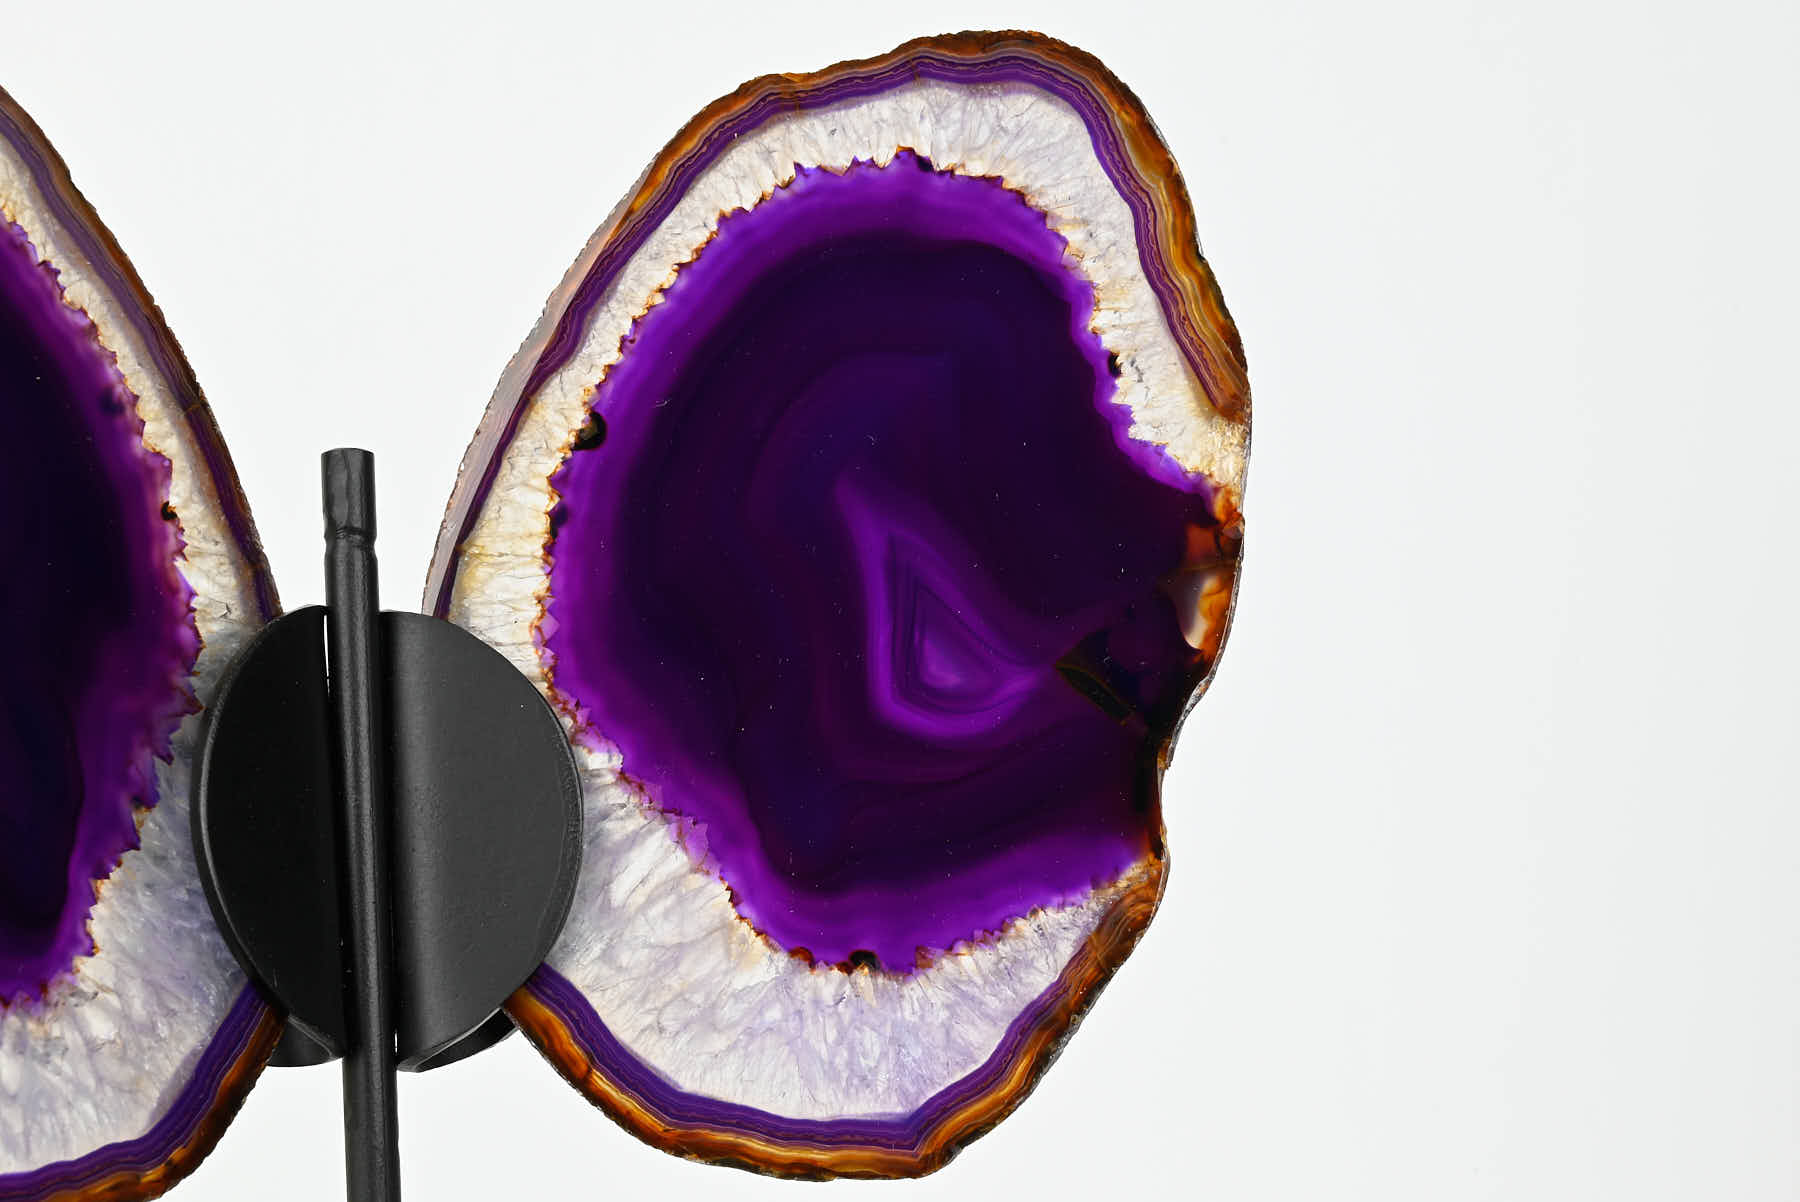 Purple Agate Butterfly on Stand - 0.62kg and 24cm Tall - #BUPURP-10006